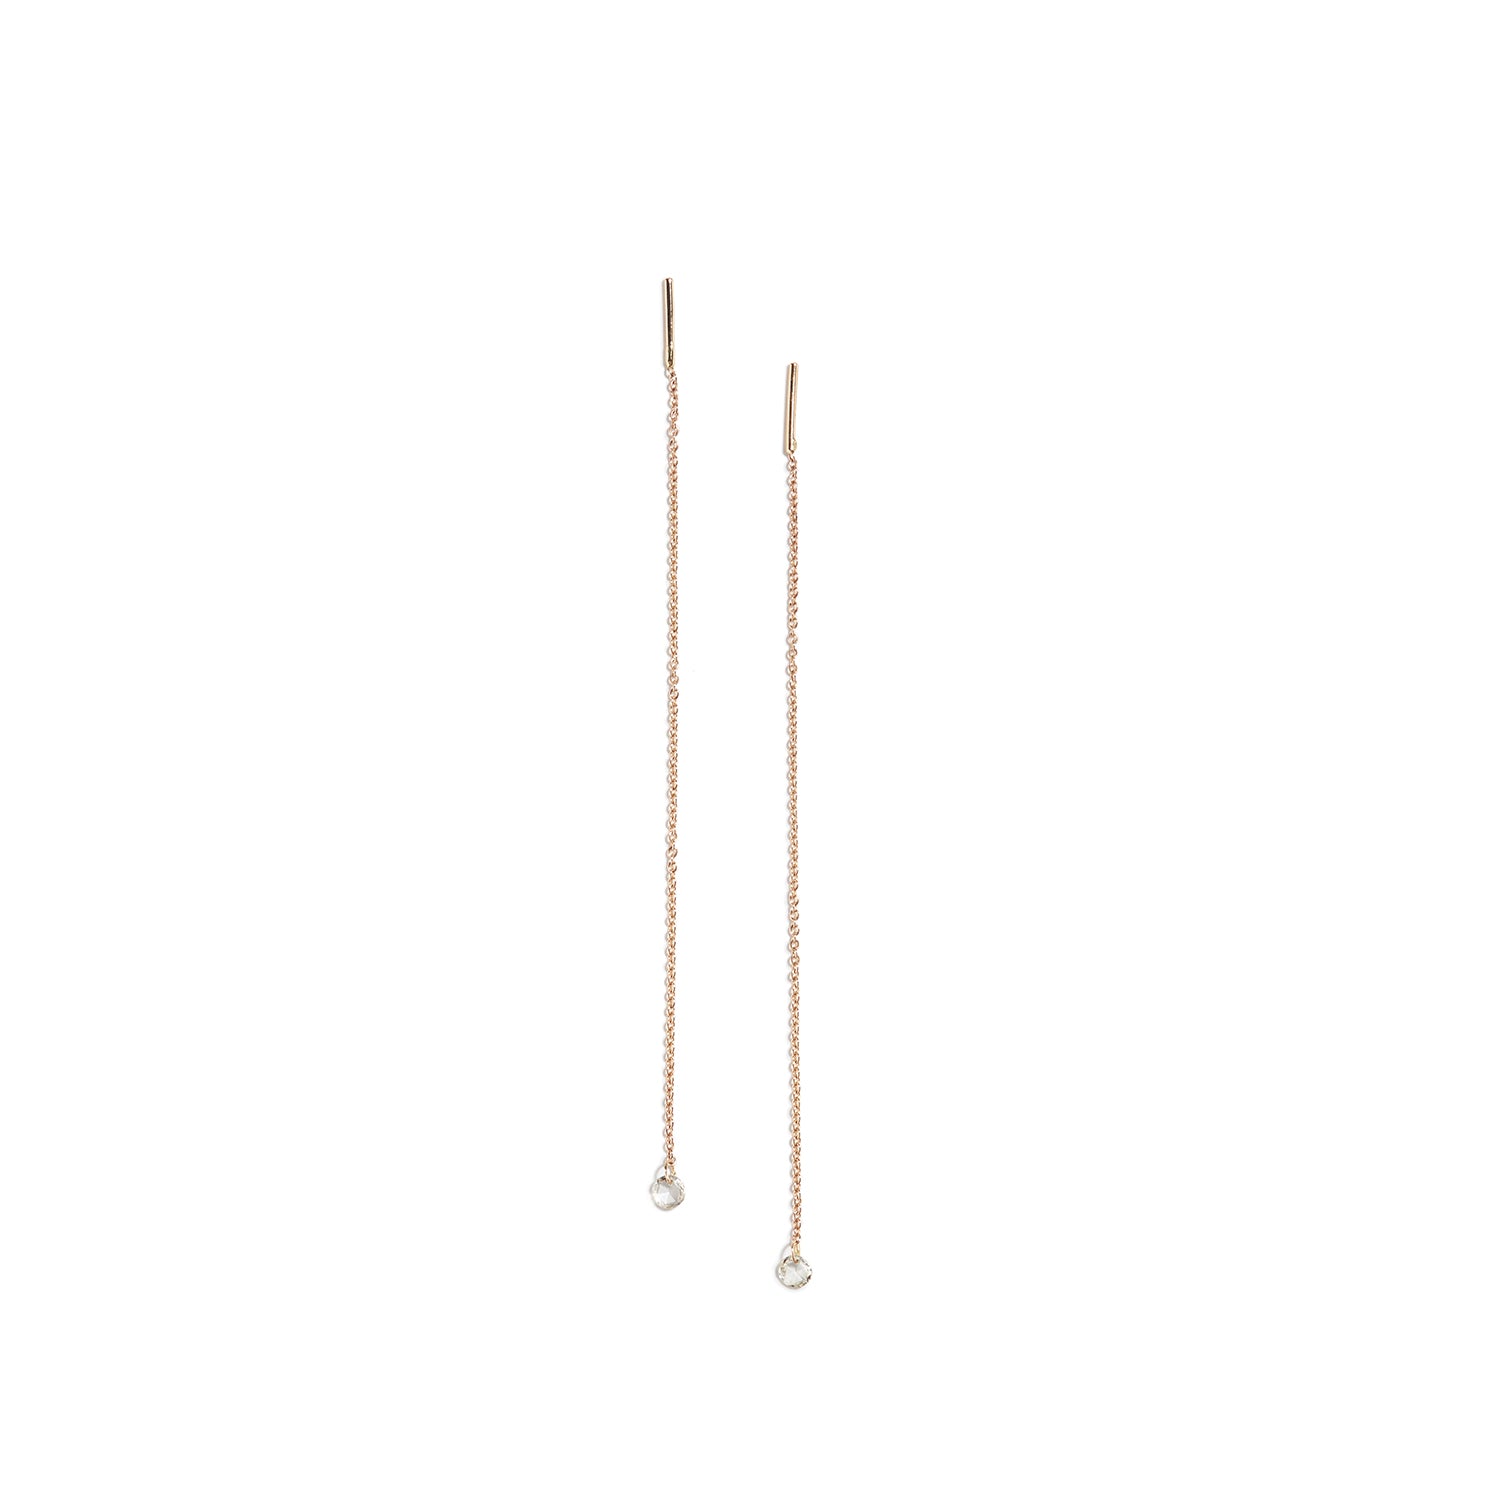 Rose Gold Earrings with Diamond Drop